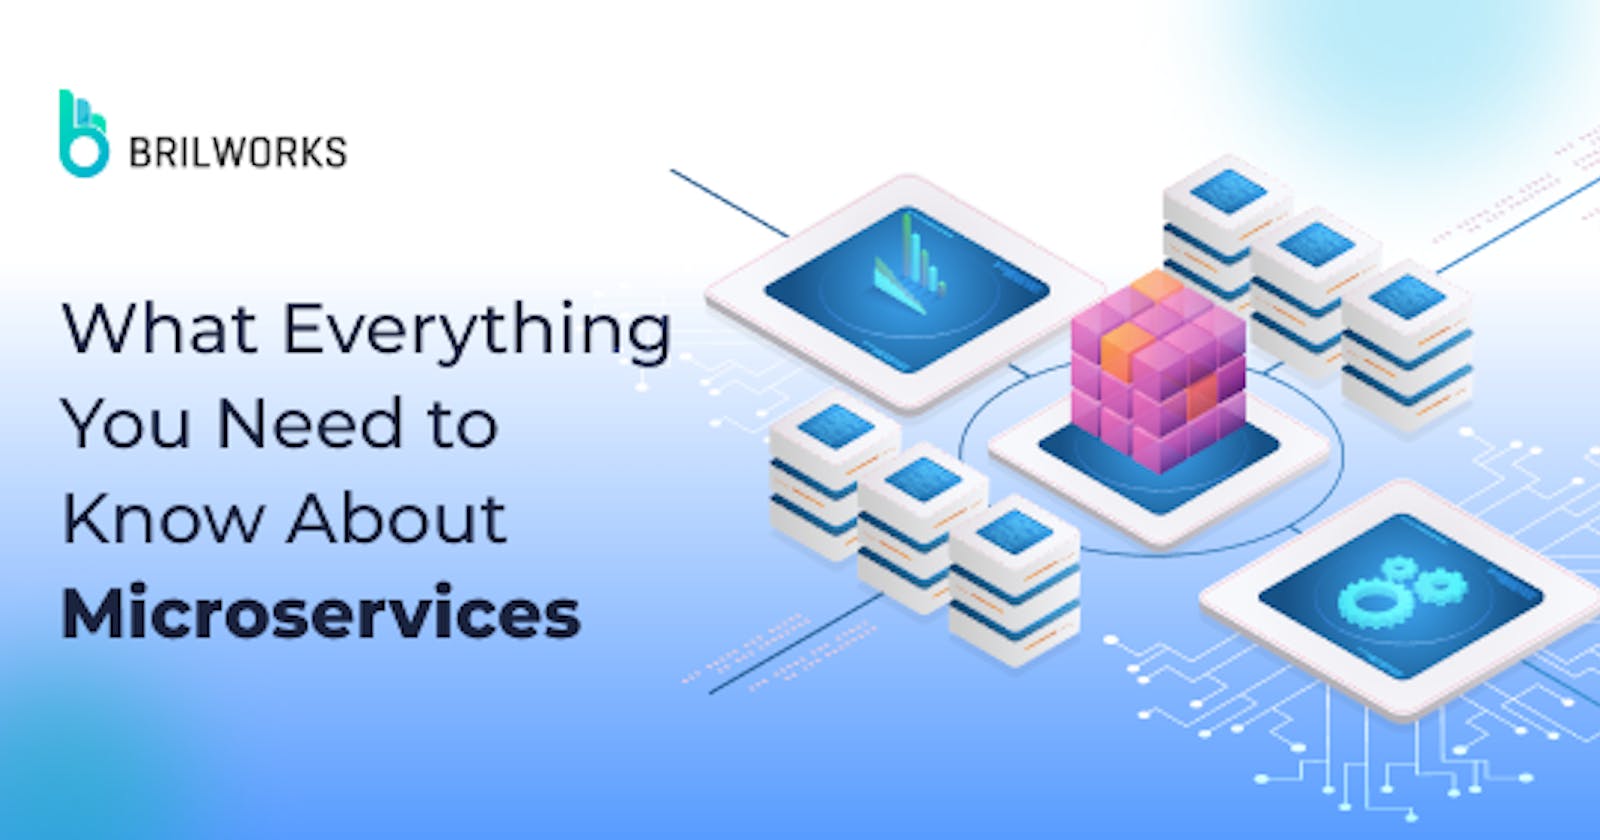 What Everything You Need to Know About Microservices